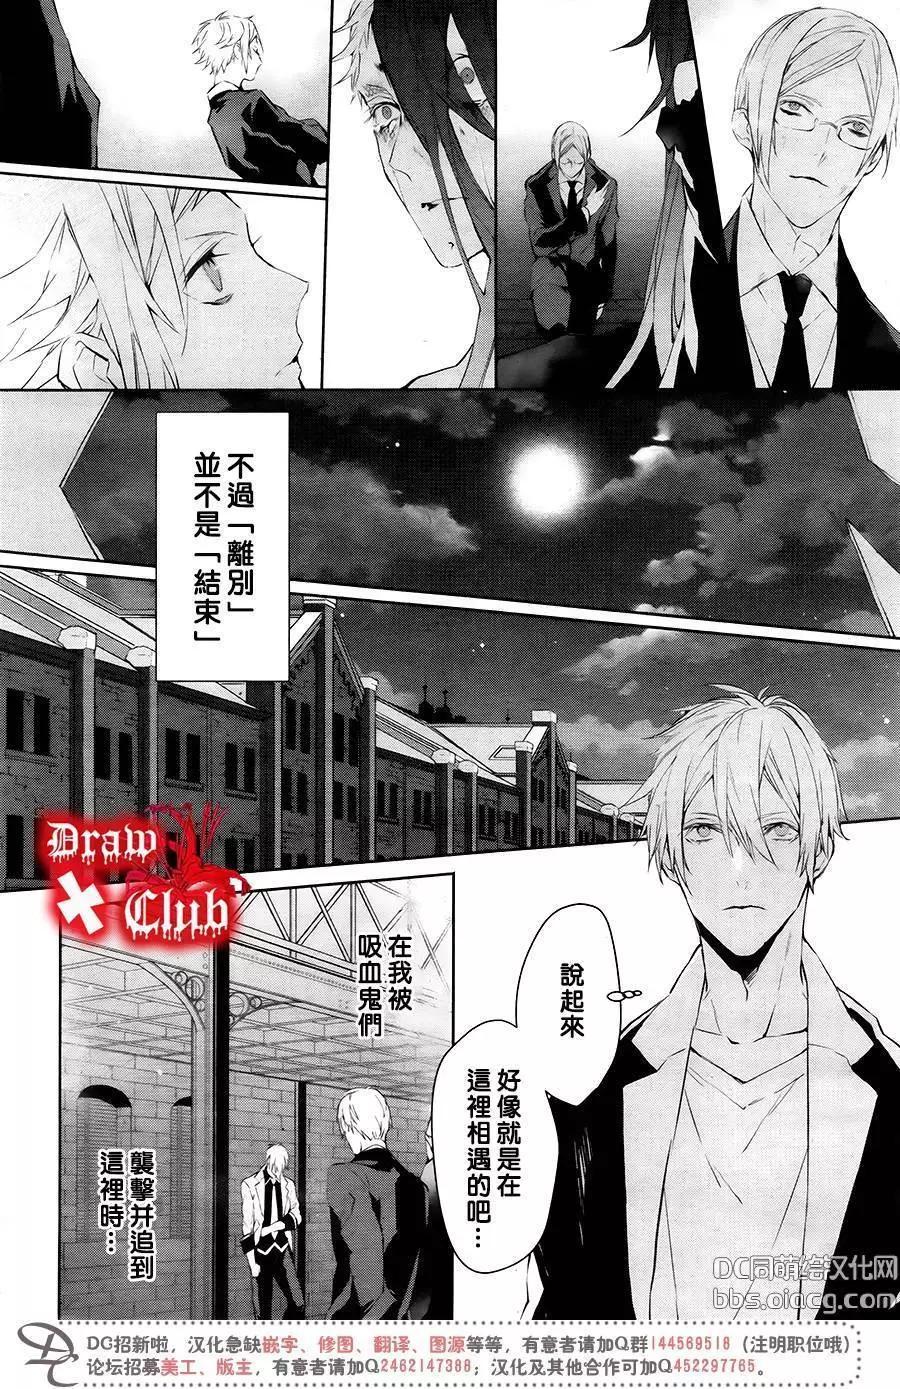 Bloody Mary - 第40回(1/2) - 5